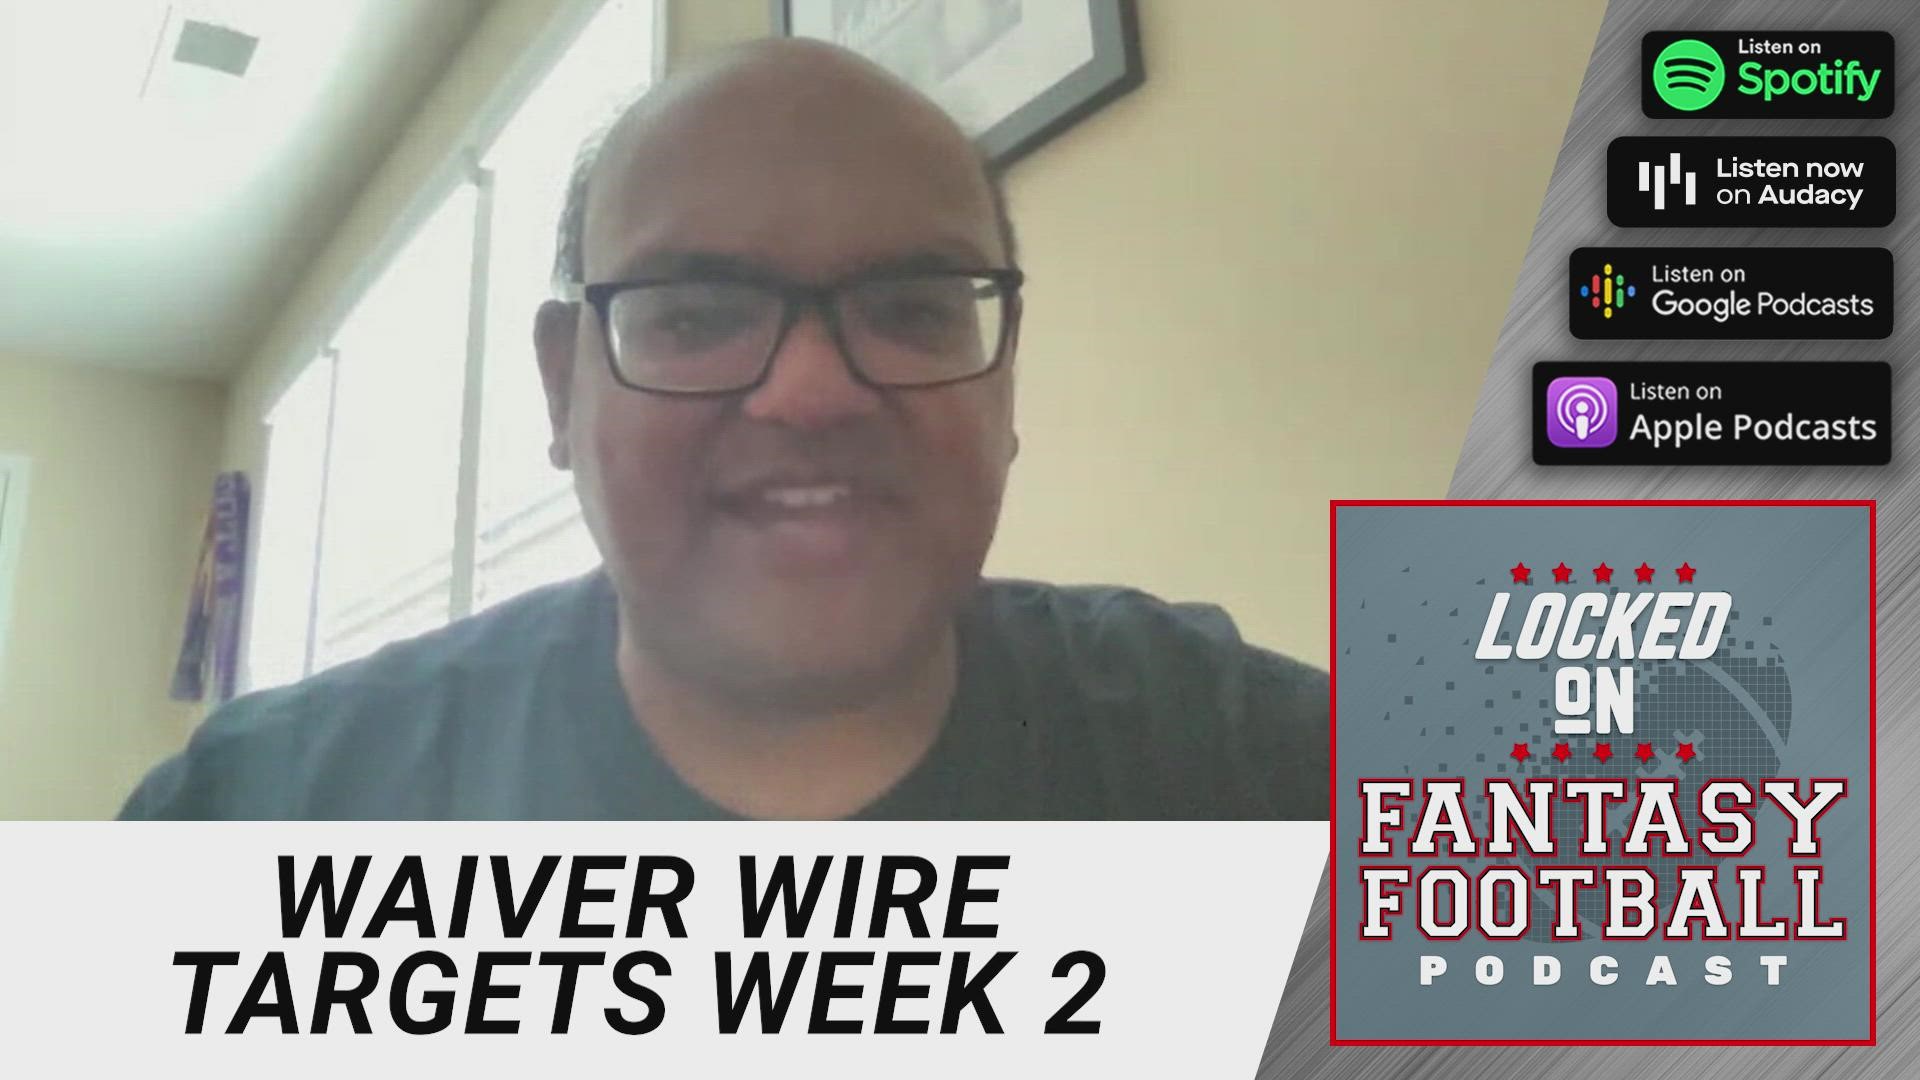 Locked On Fantasy Football host Vinnie Iyer gave several players you should be targeting on your league’s waiver wire this week.